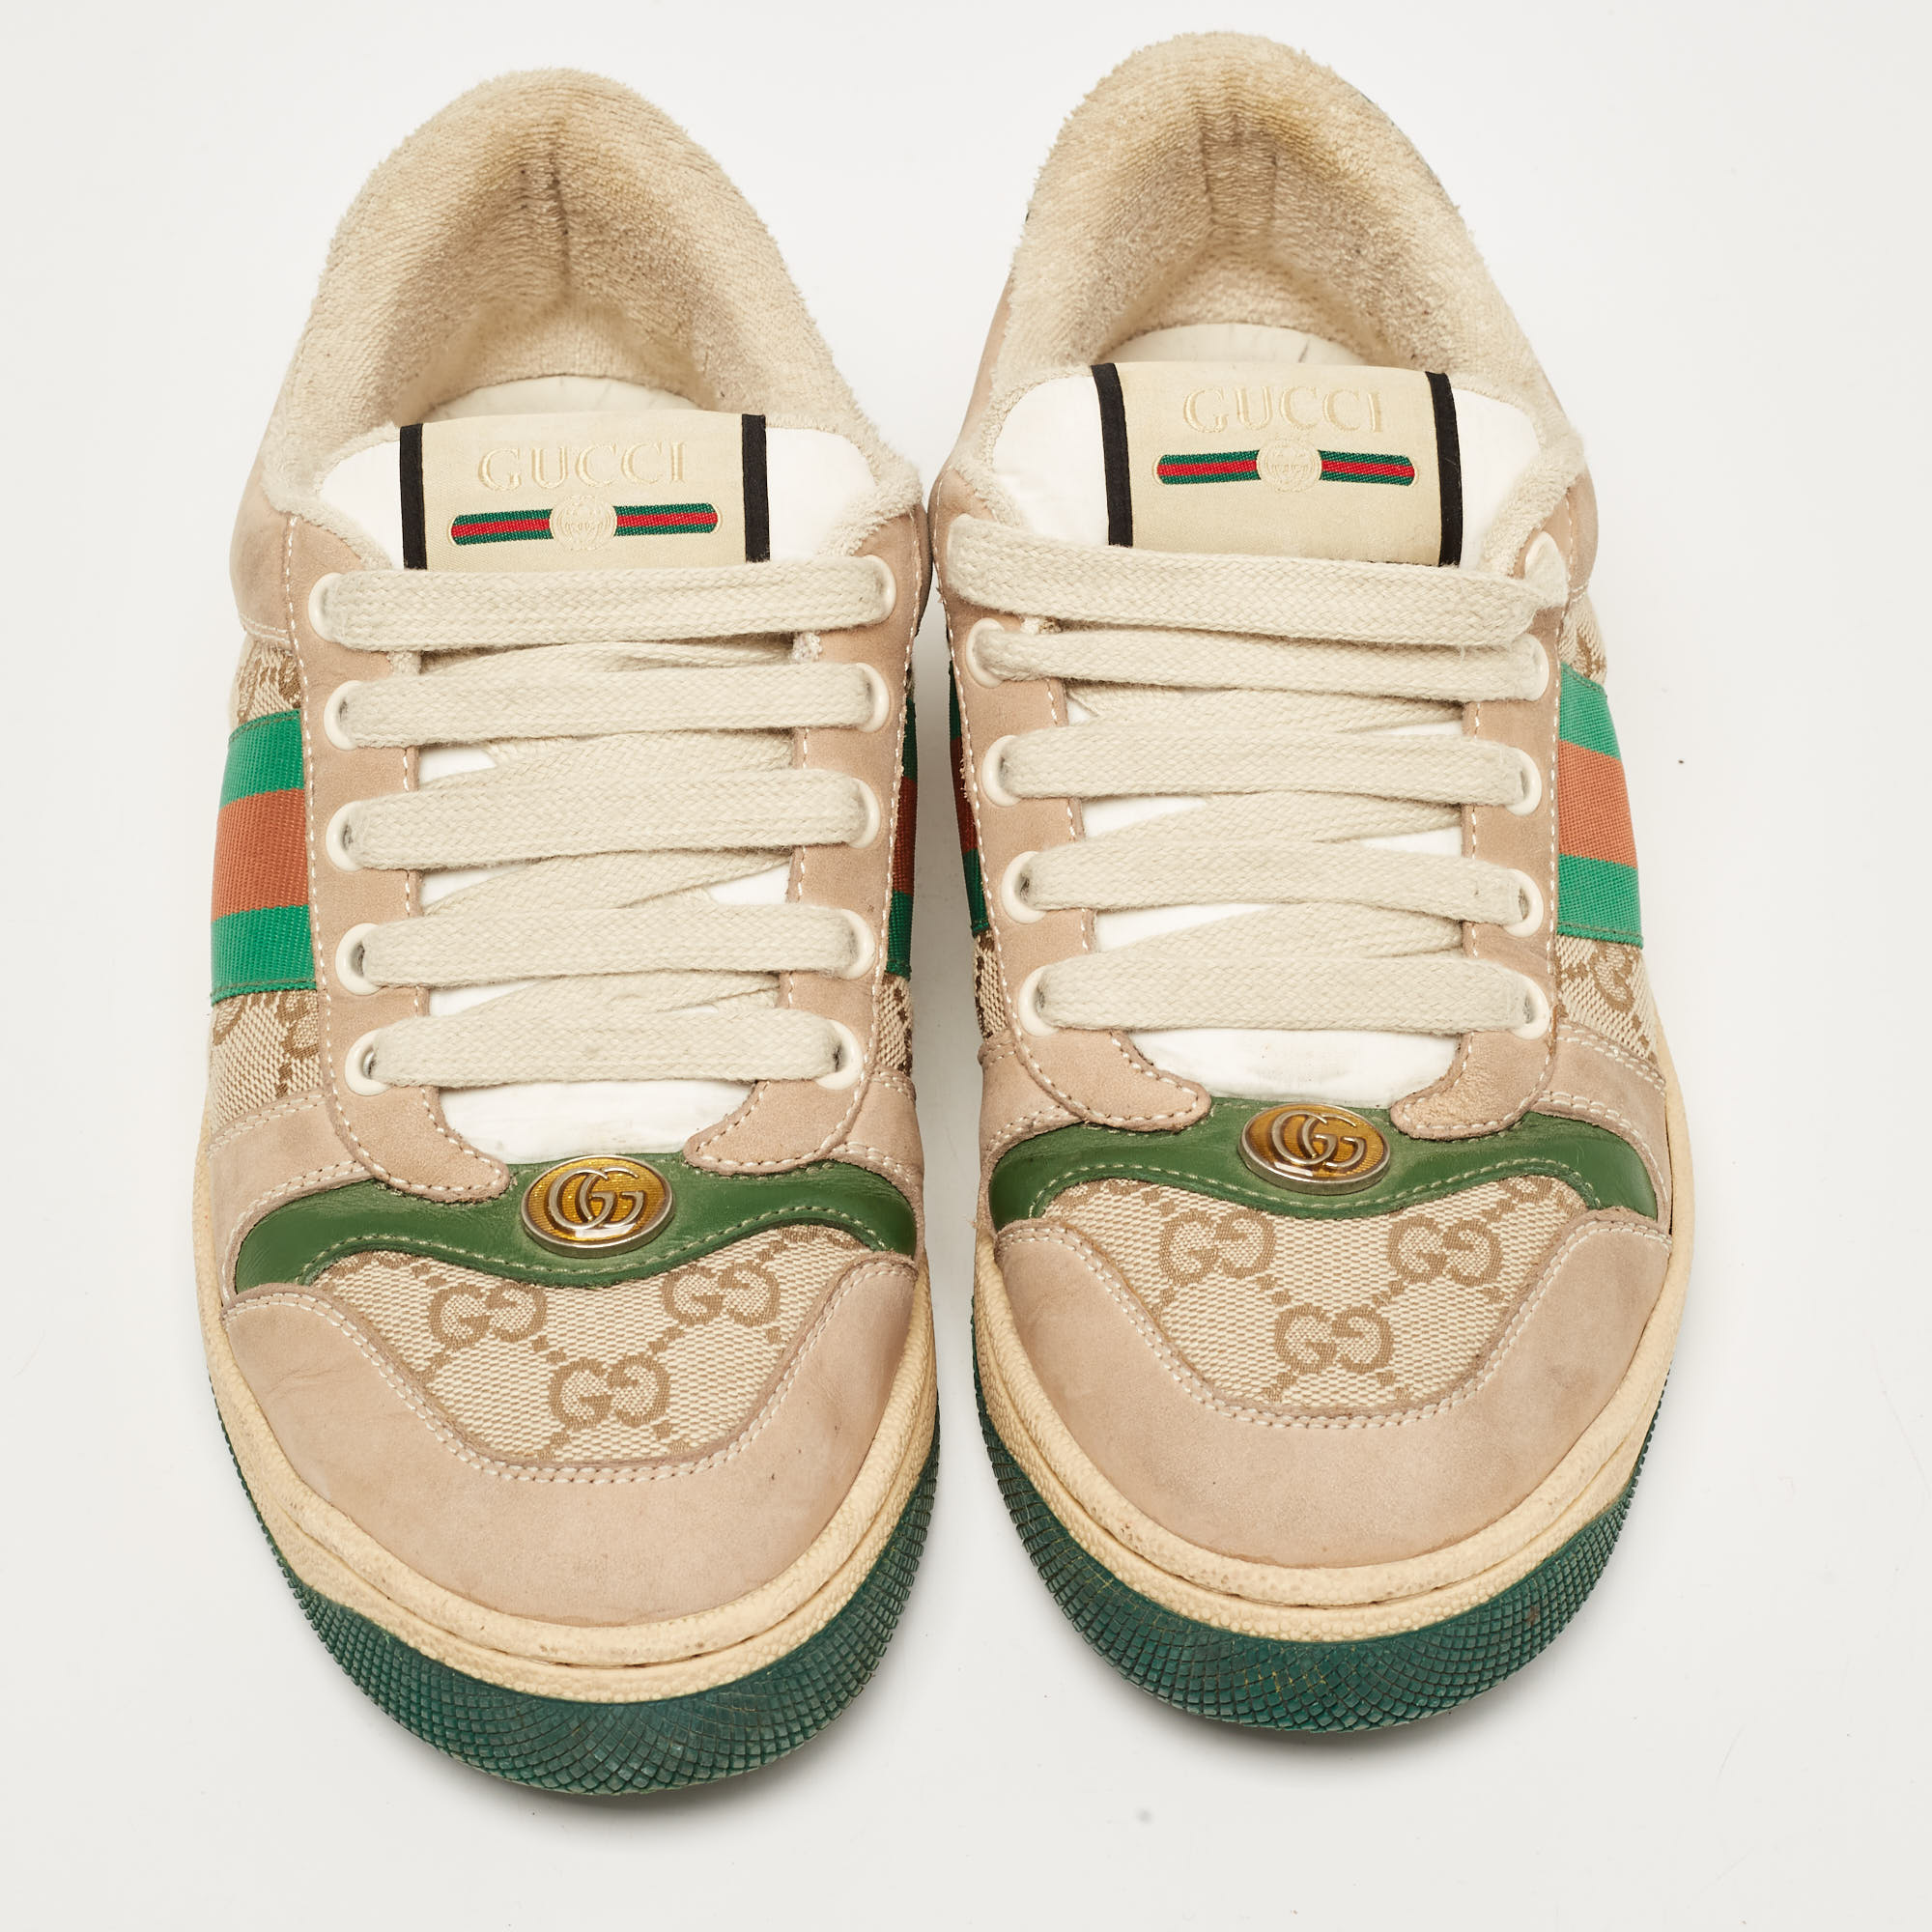 Gucci Multicolor Nubuck And Leather Screener Sneakers Size 37